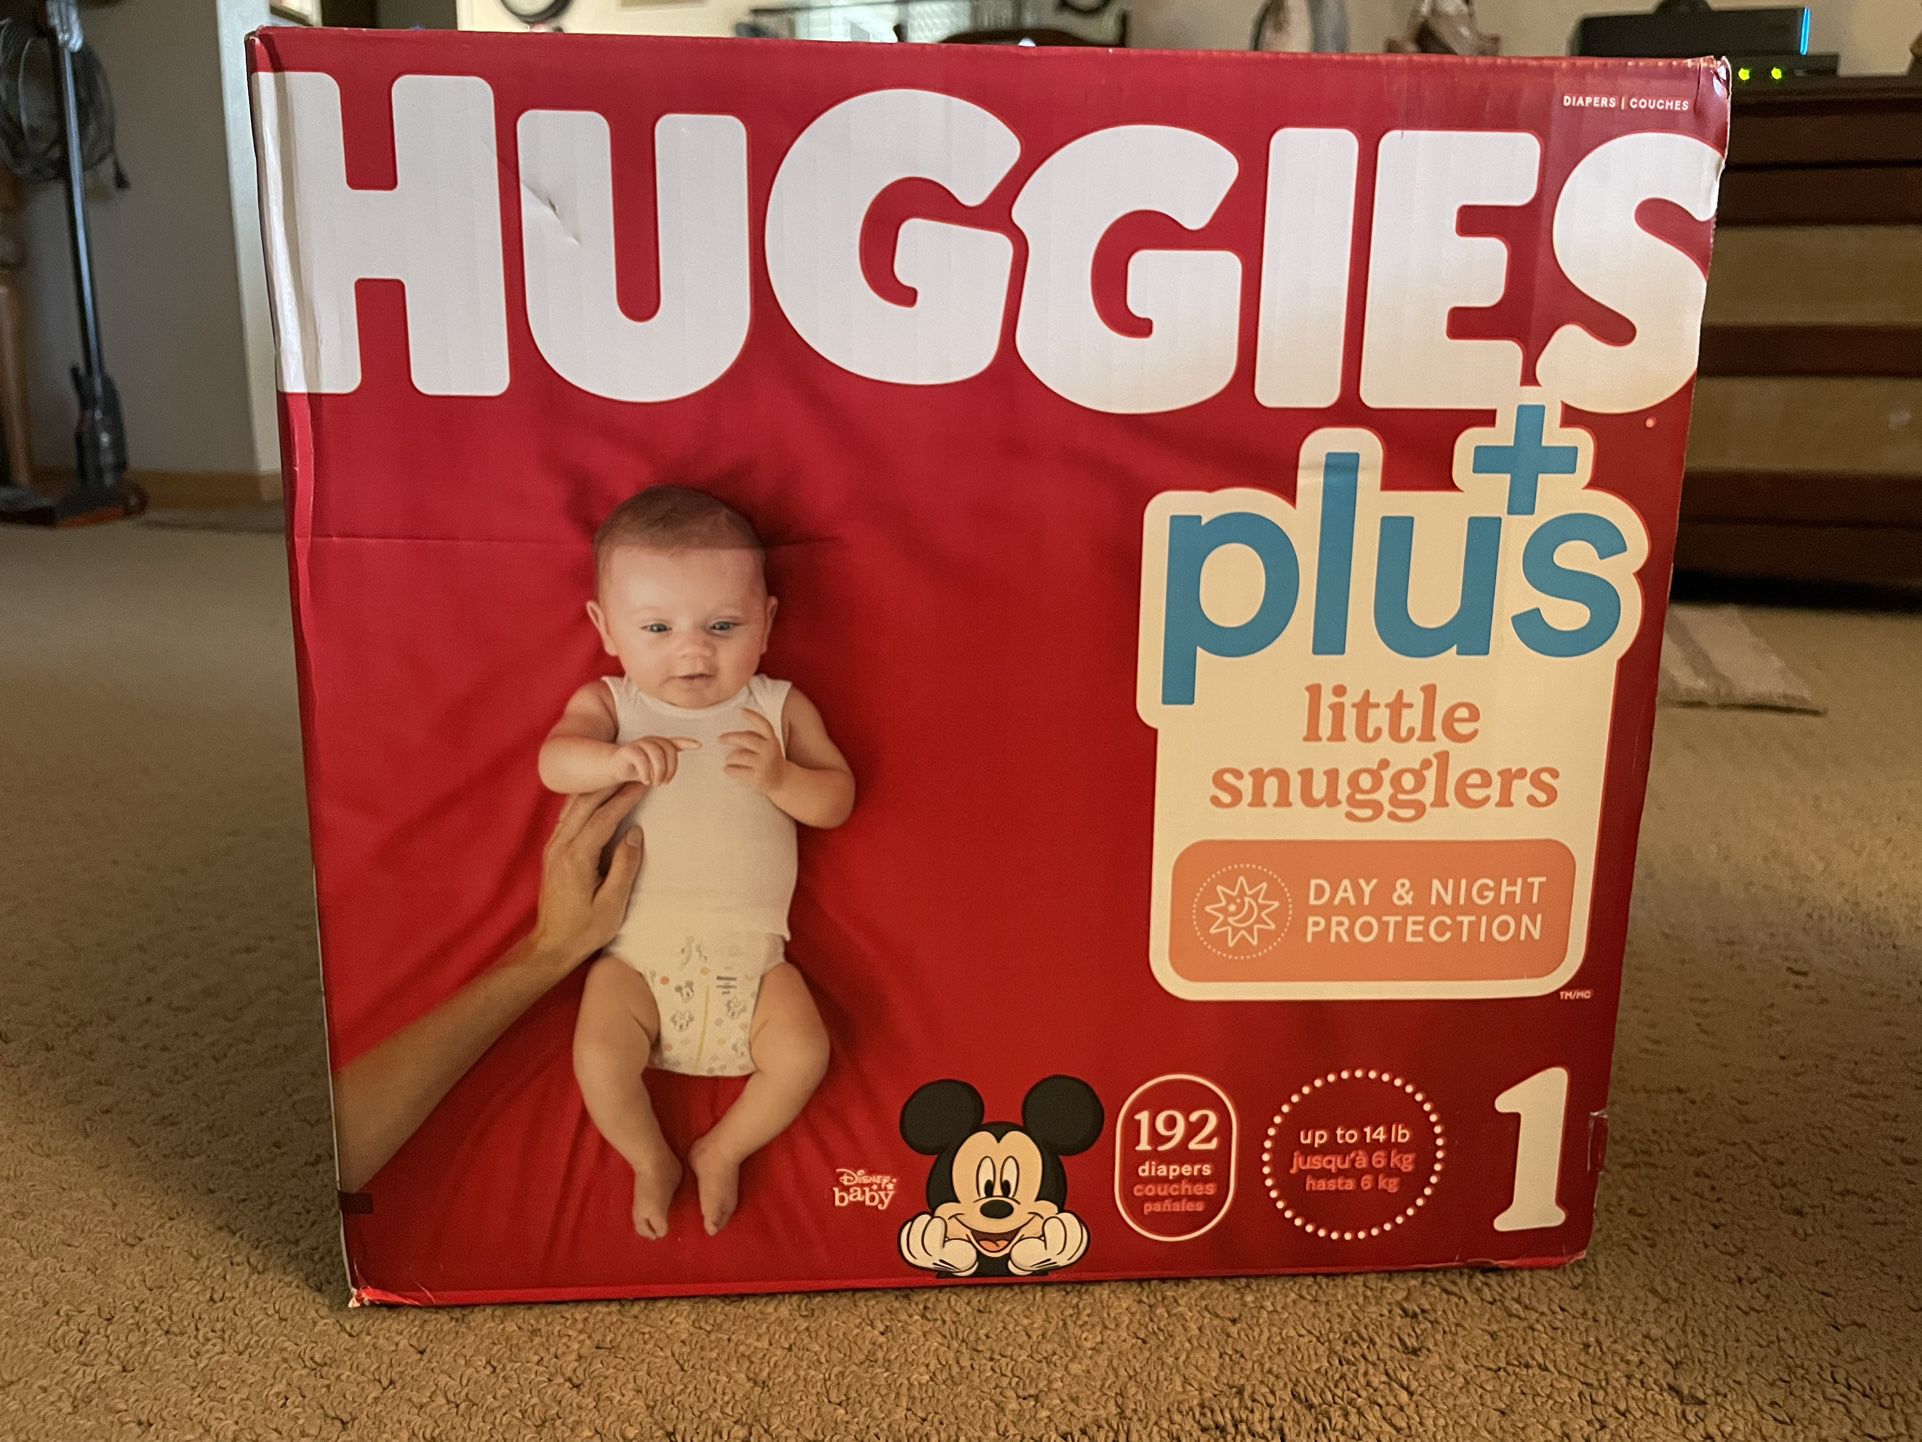 Huggies Little Snugglers Plus Day & Night Protection Size 1